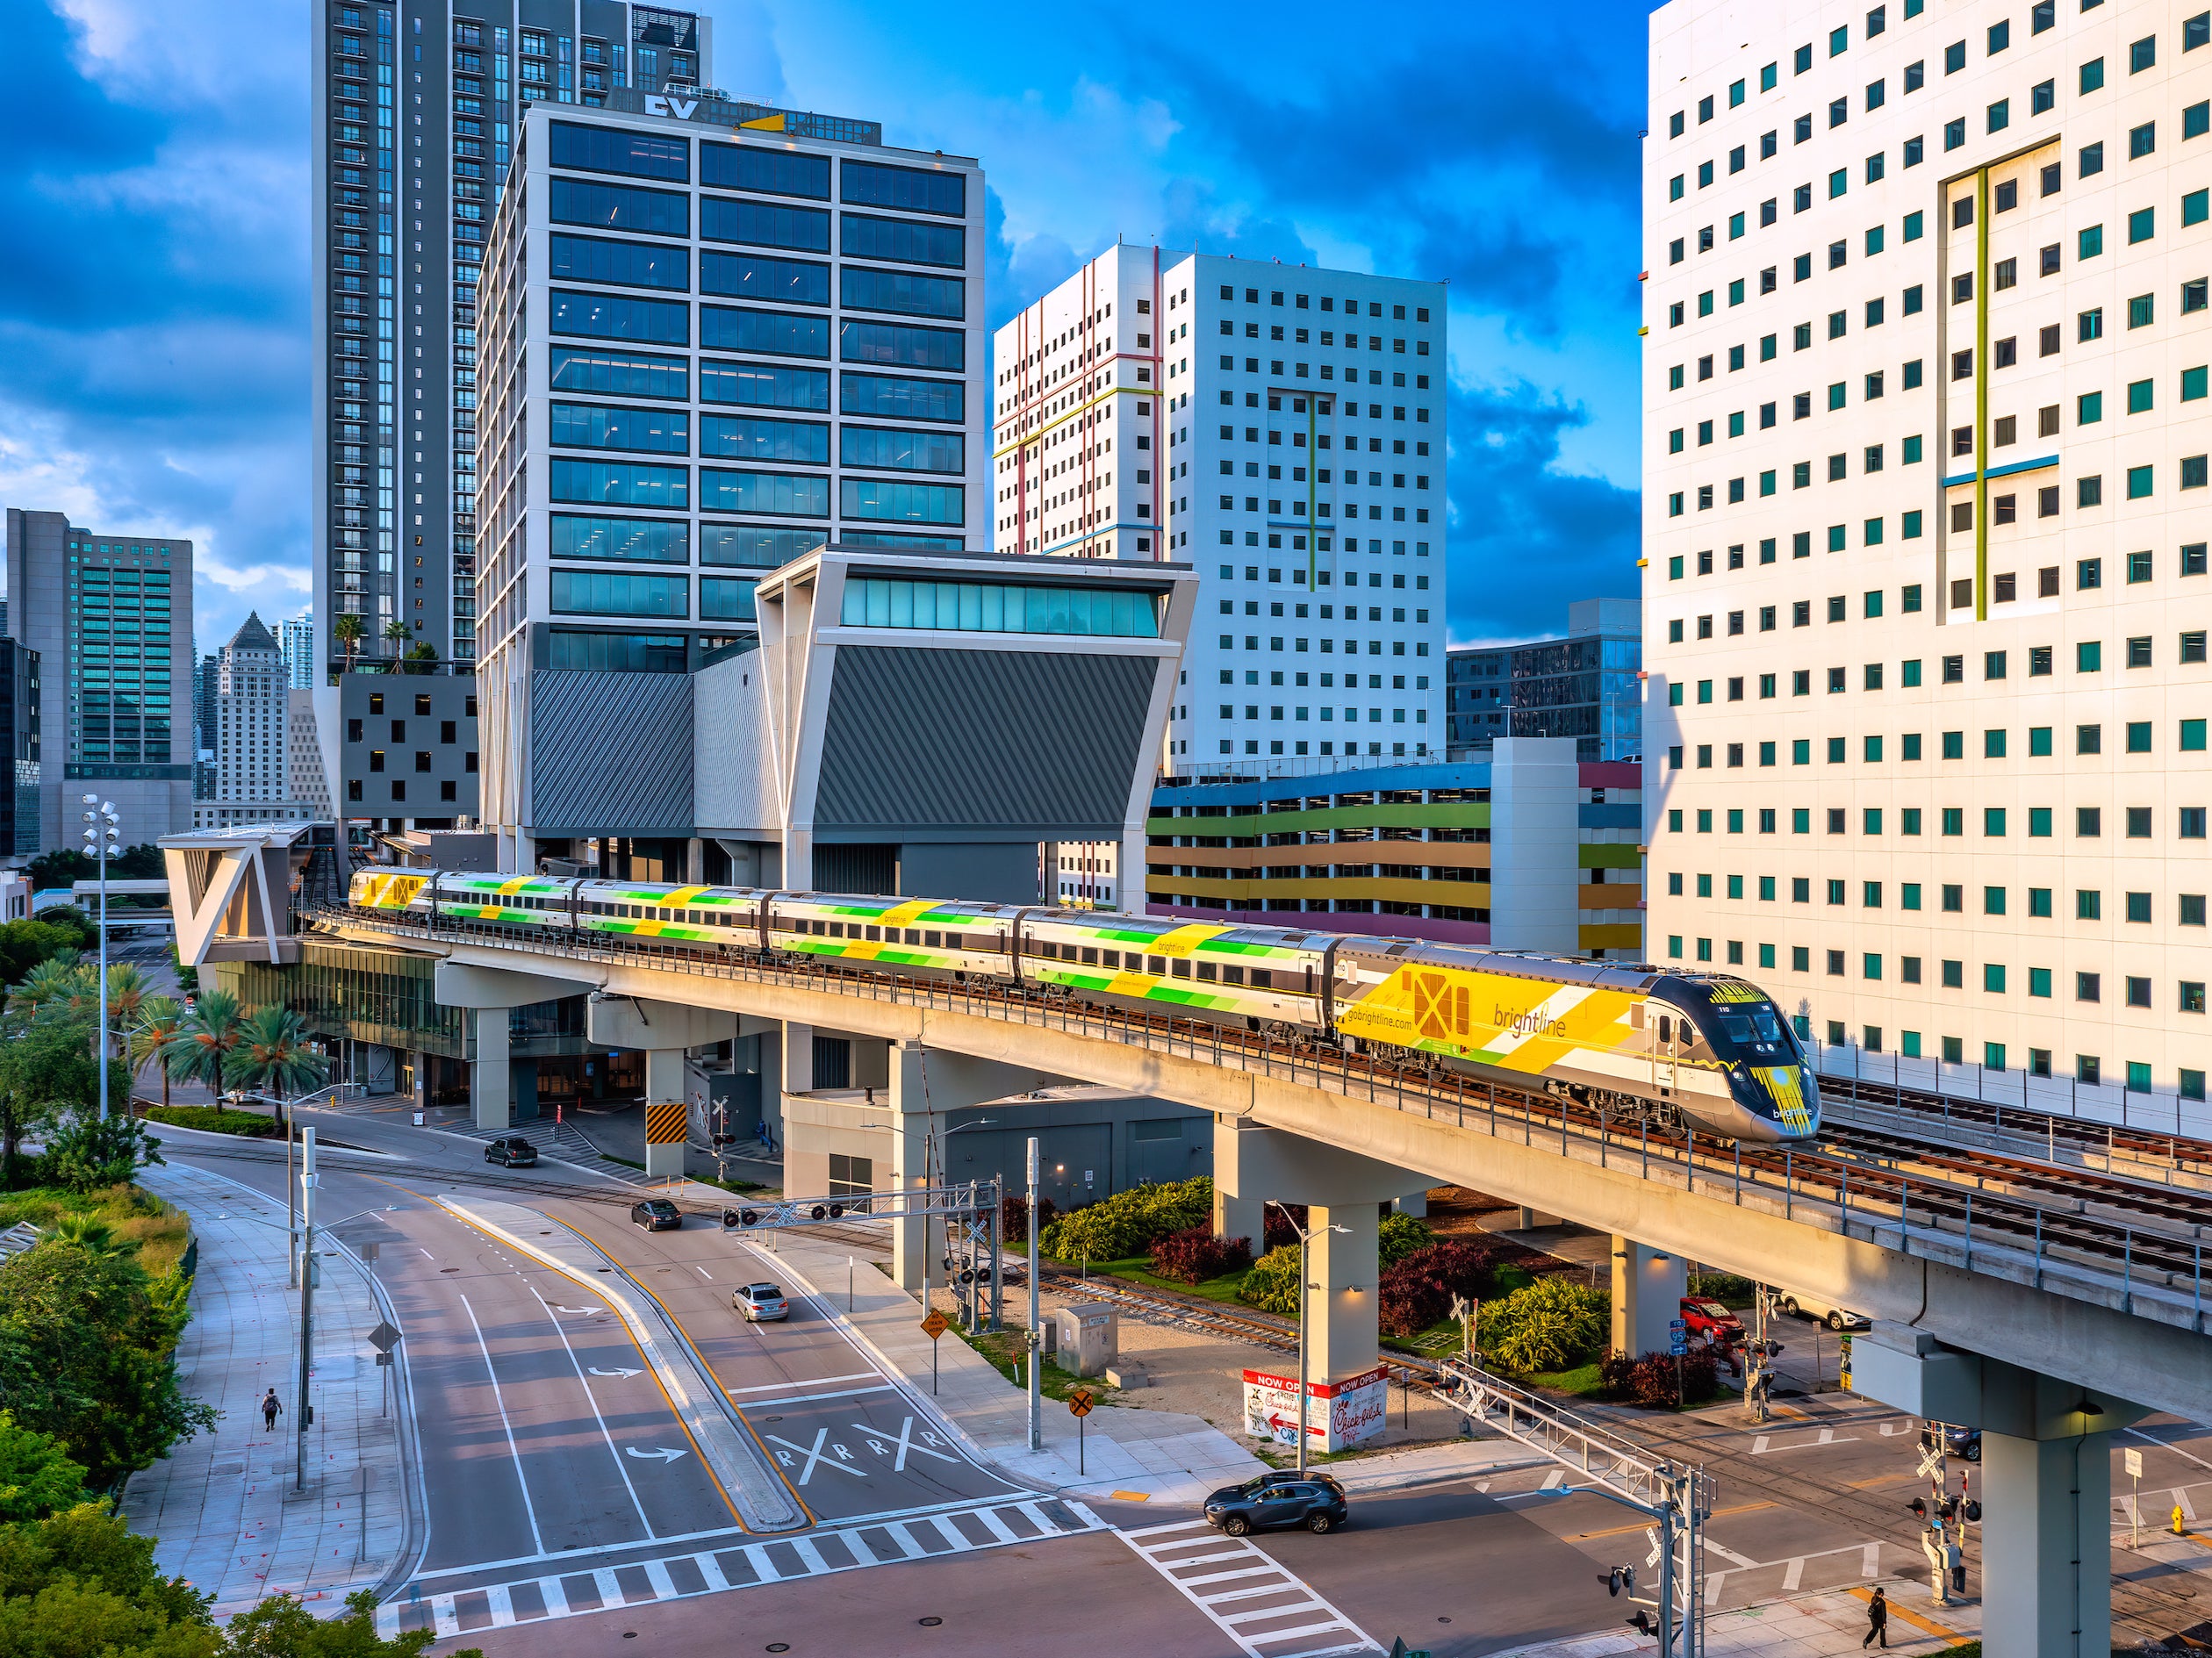 The Brightline offers high-rise city views as it goes through Miami